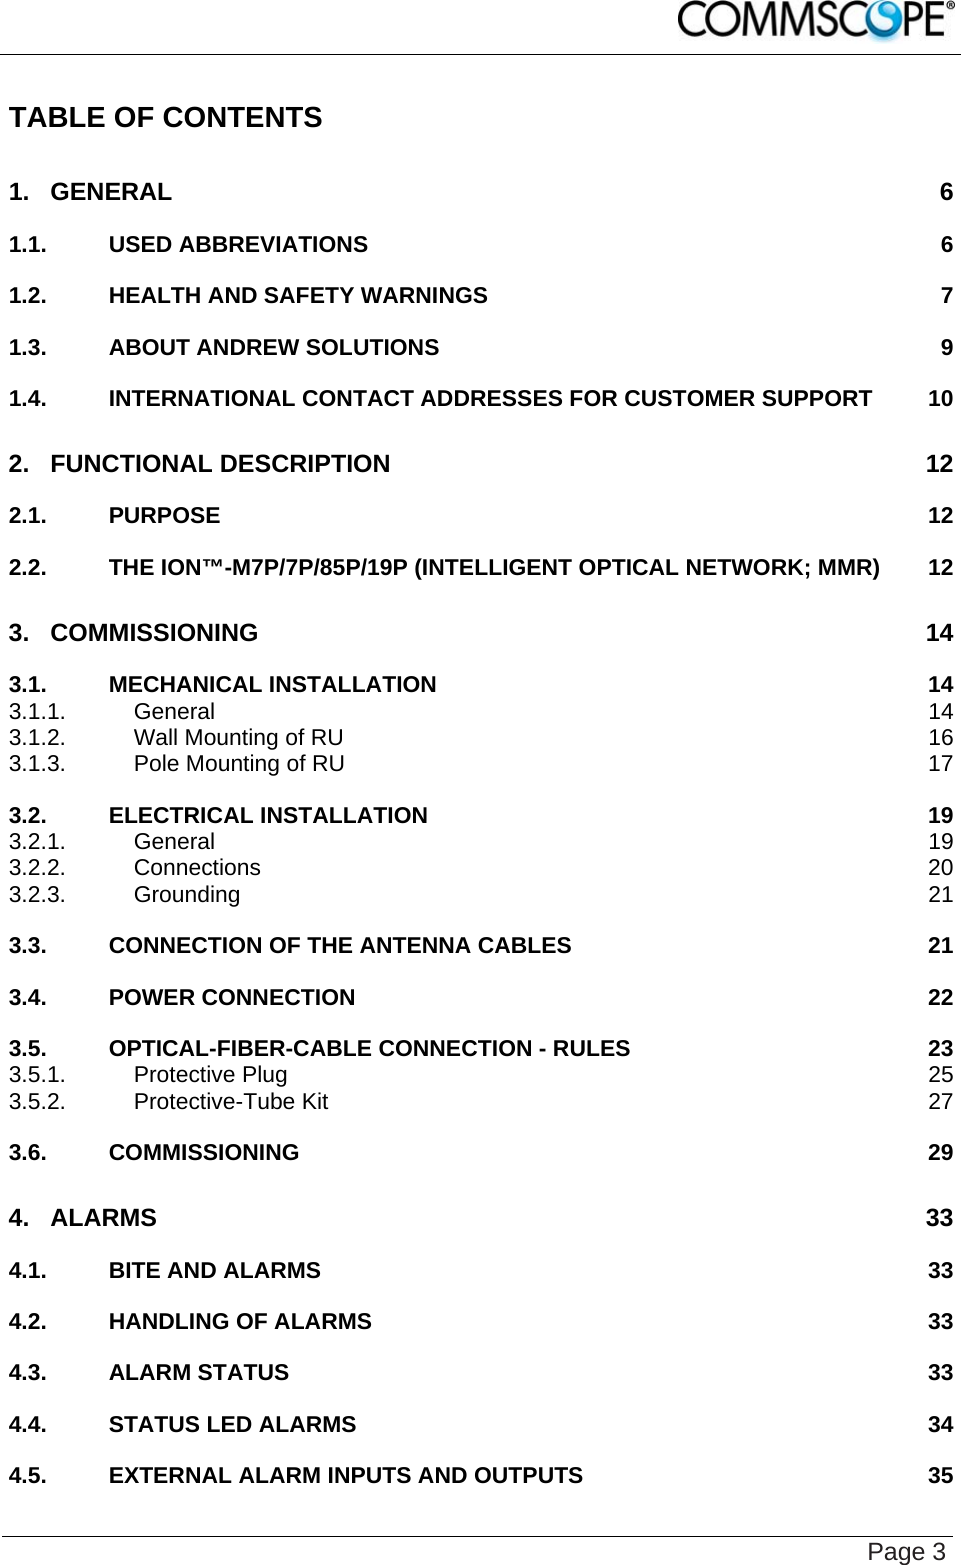    Page 3 TABLE OF CONTENTS 1. GENERAL 6 1.1. USED ABBREVIATIONS 6 1.2. HEALTH AND SAFETY WARNINGS 7 1.3. ABOUT ANDREW SOLUTIONS 9 1.4. INTERNATIONAL CONTACT ADDRESSES FOR CUSTOMER SUPPORT 10 2. FUNCTIONAL DESCRIPTION 12 2.1. PURPOSE 12 2.2. THE ION™-M7P/7P/85P/19P (INTELLIGENT OPTICAL NETWORK; MMR) 12 3. COMMISSIONING 14 3.1. MECHANICAL INSTALLATION 14 3.1.1. General 14 3.1.2. Wall Mounting of RU 16 3.1.3. Pole Mounting of RU 17 3.2. ELECTRICAL INSTALLATION 19 3.2.1. General 19 3.2.2. Connections 20 3.2.3. Grounding 21 3.3. CONNECTION OF THE ANTENNA CABLES 21 3.4. POWER CONNECTION 22 3.5. OPTICAL-FIBER-CABLE CONNECTION - RULES 23 3.5.1. Protective Plug 25 3.5.2. Protective-Tube Kit 27 3.6. COMMISSIONING 29 4. ALARMS 33 4.1. BITE AND ALARMS 33 4.2. HANDLING OF ALARMS 33 4.3. ALARM STATUS 33 4.4. STATUS LED ALARMS 34 4.5. EXTERNAL ALARM INPUTS AND OUTPUTS 35 